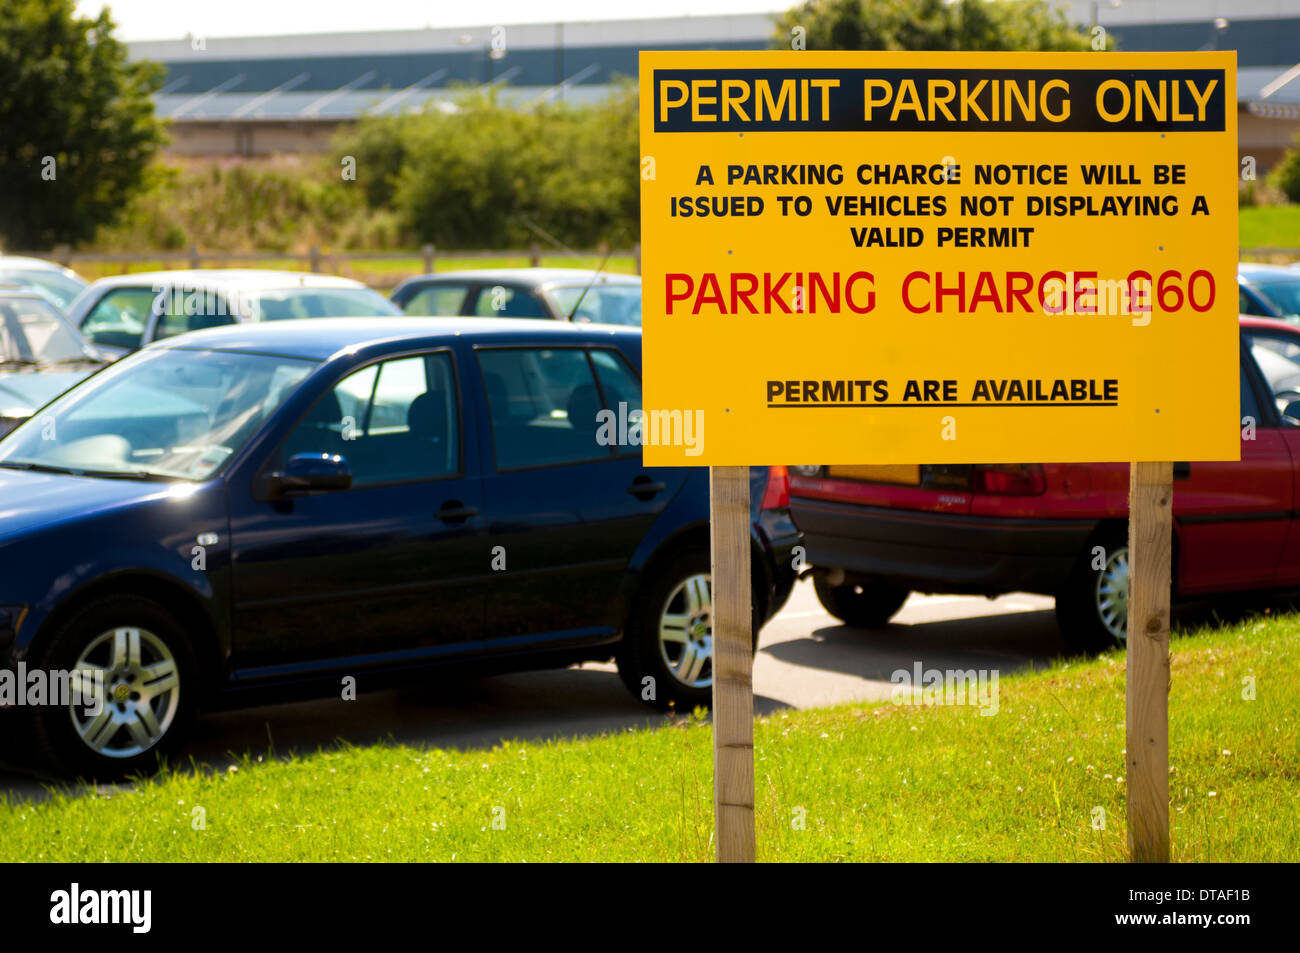 Permit parking only sign on private car park Stock Photo